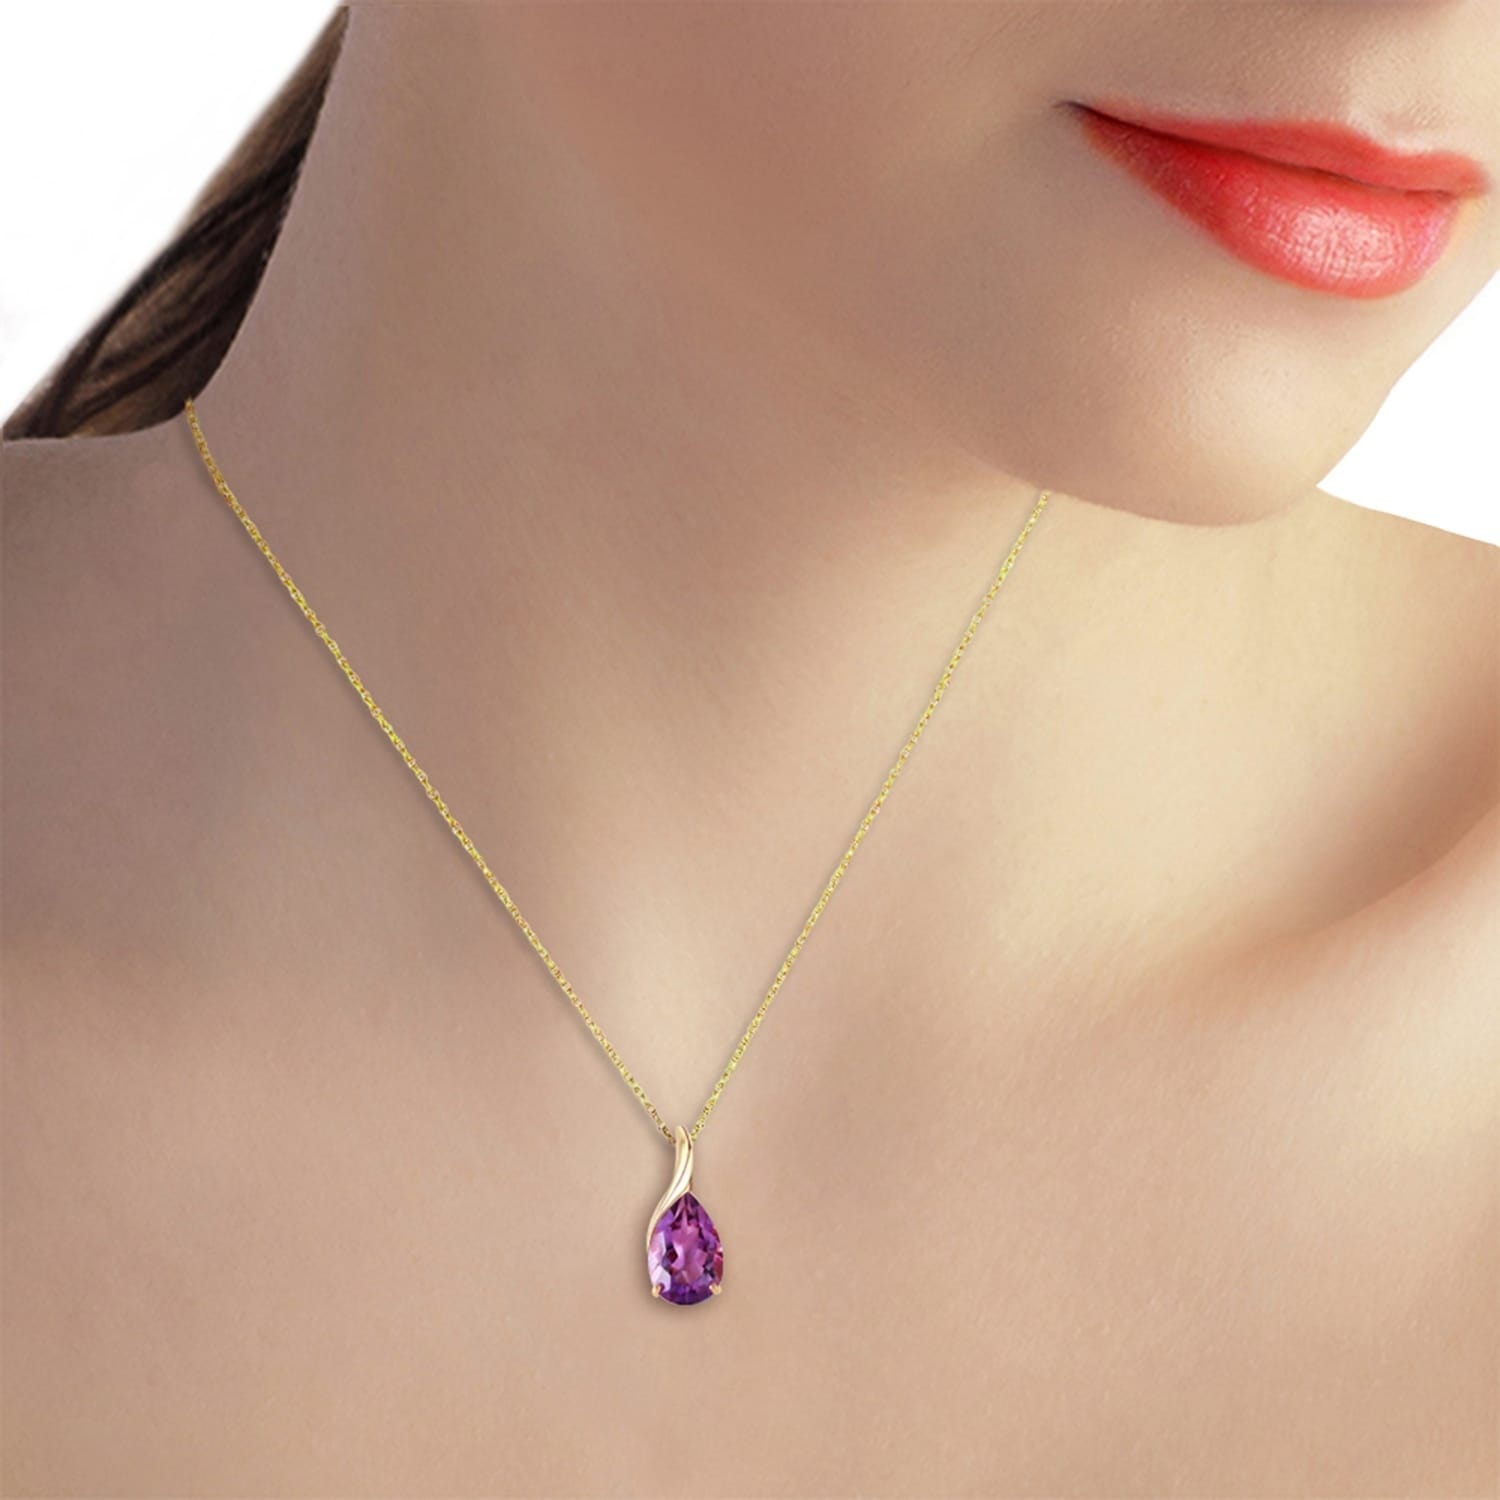 DG EXCLUSIVE OUTSTANDING 453.00 CTS 5 LINE PURPLE AMETHYST NECKLACE STRAND